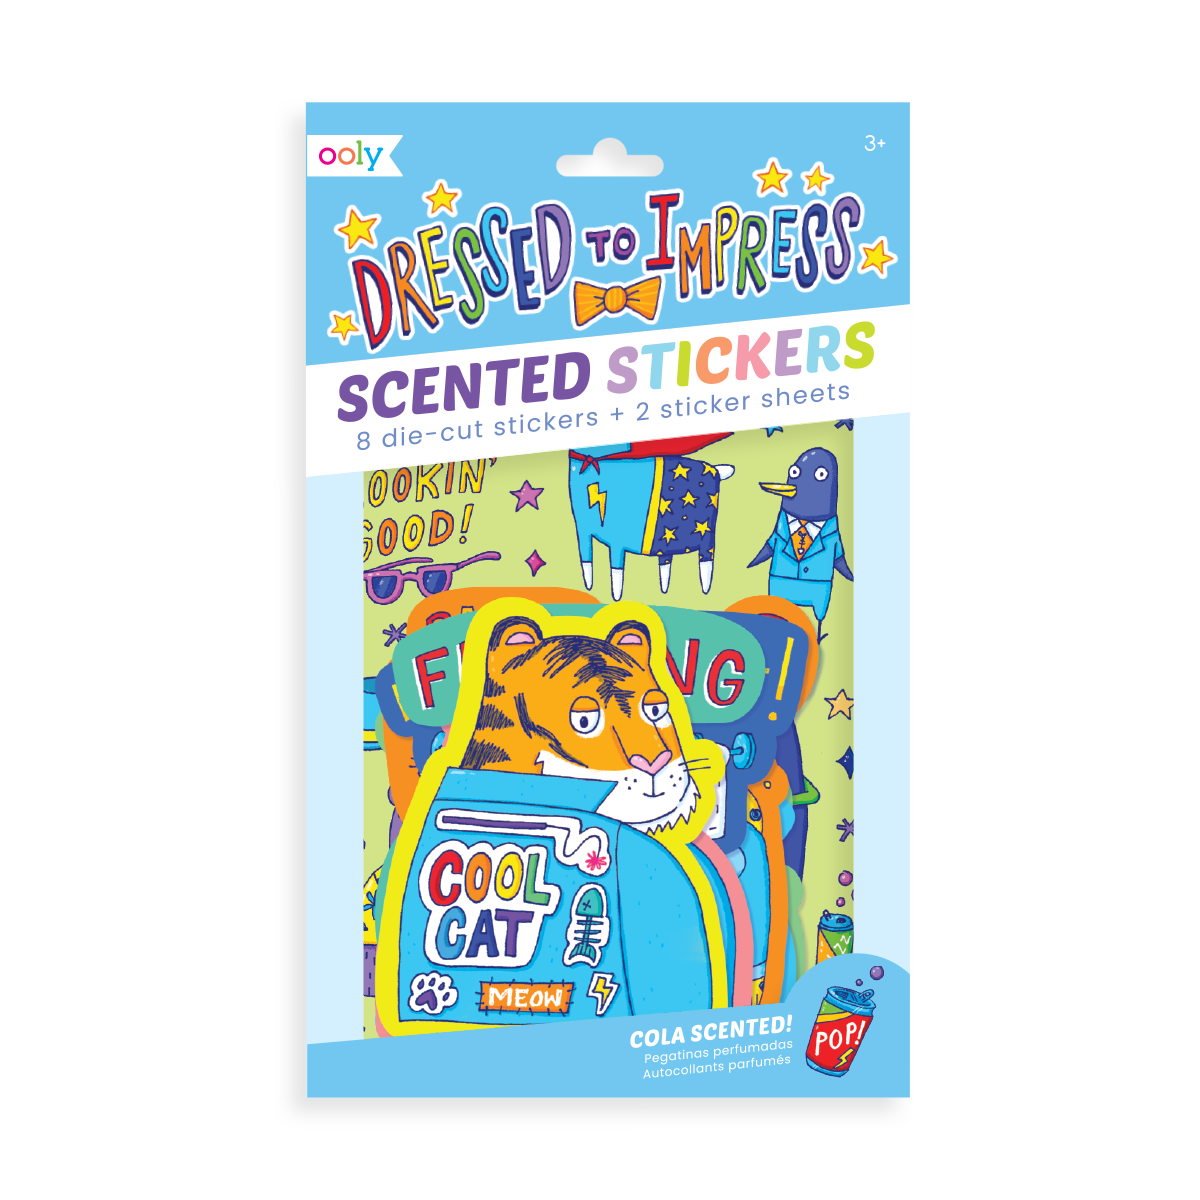 OOLY Dressed to Impress Scented Stickers in packaging